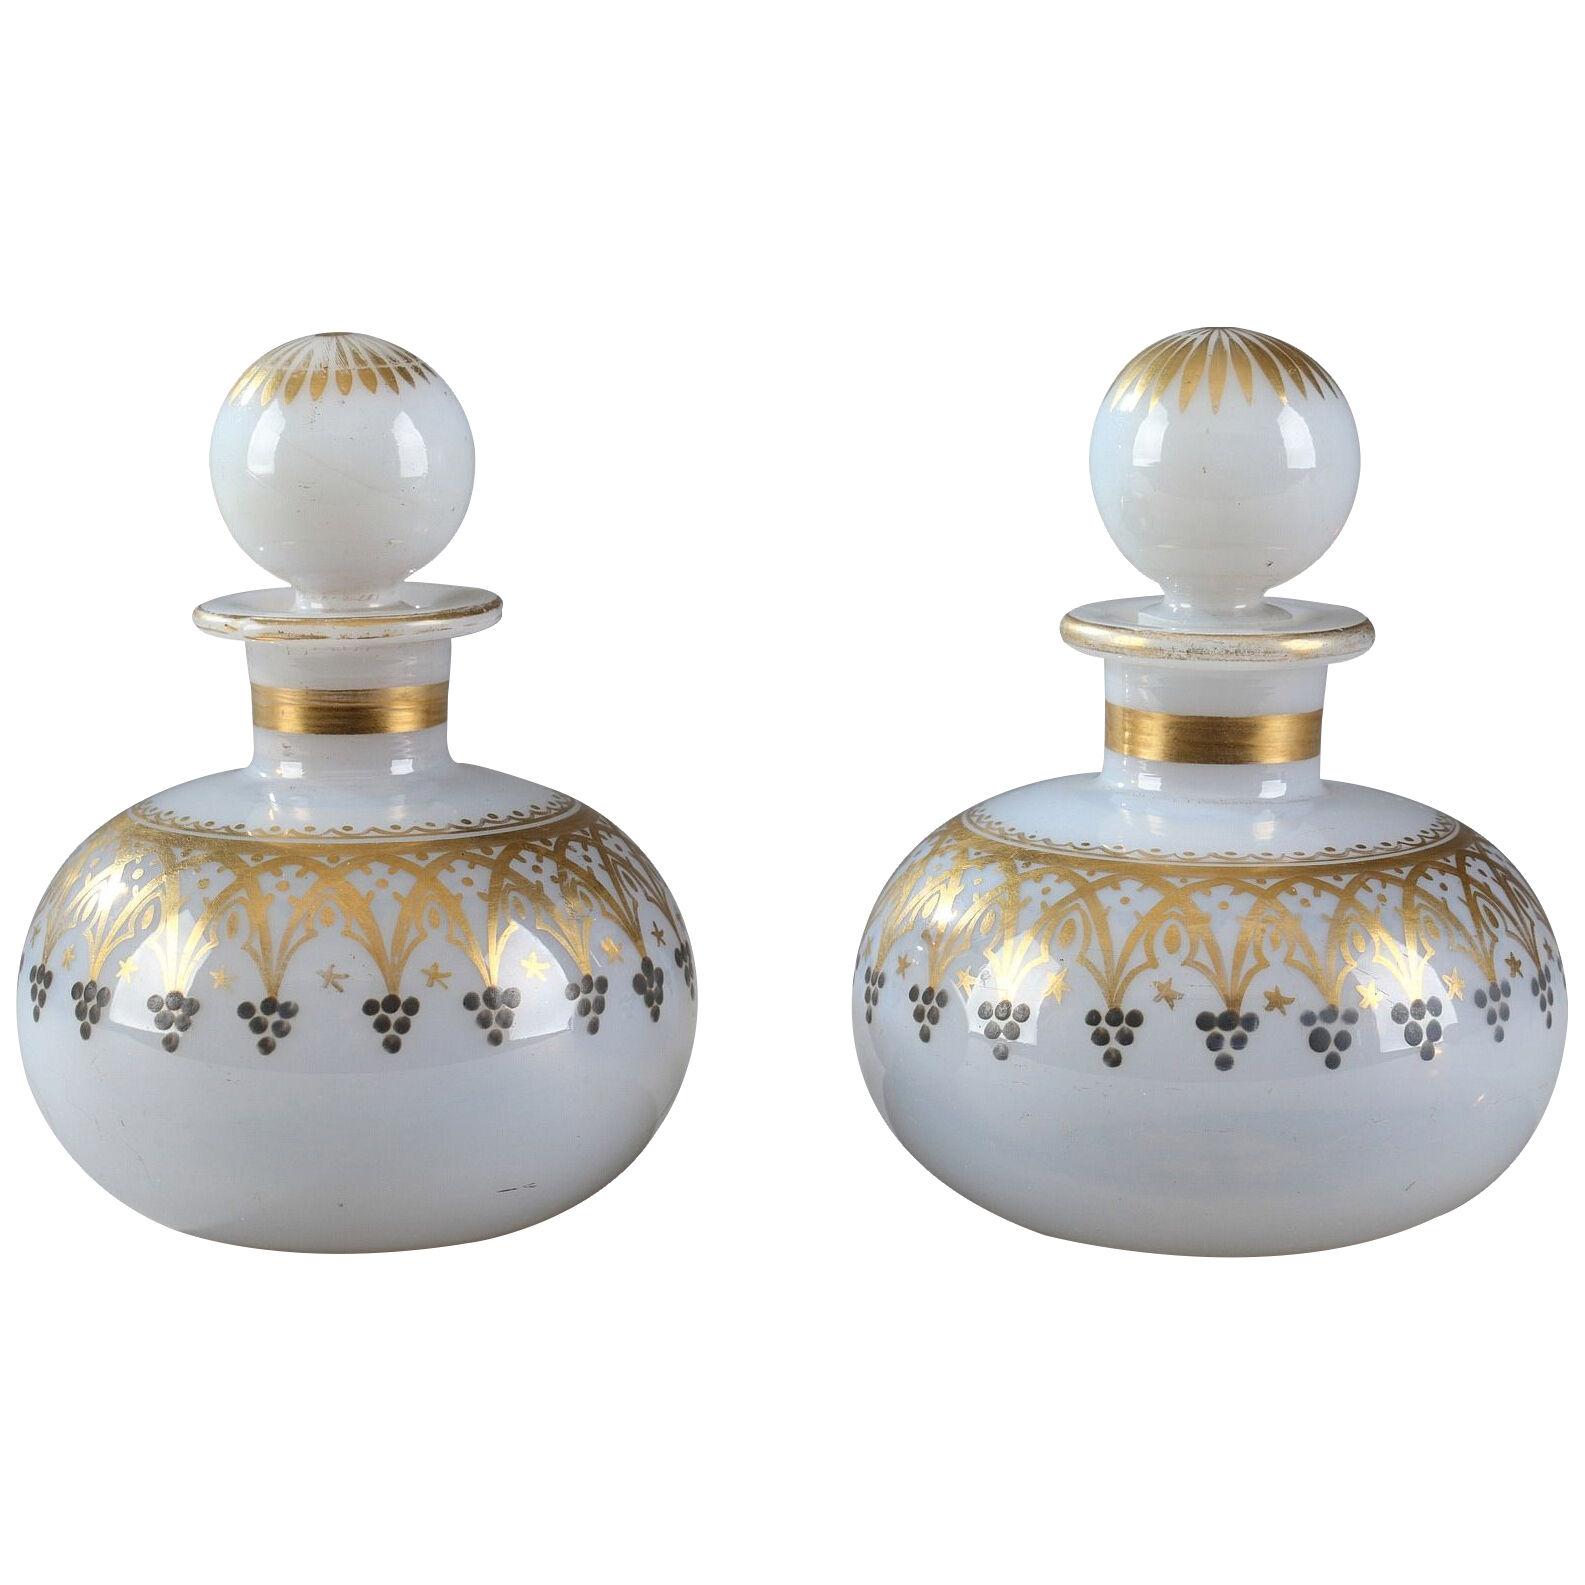 Pair of Opaline Flasks With Gothic Decoration